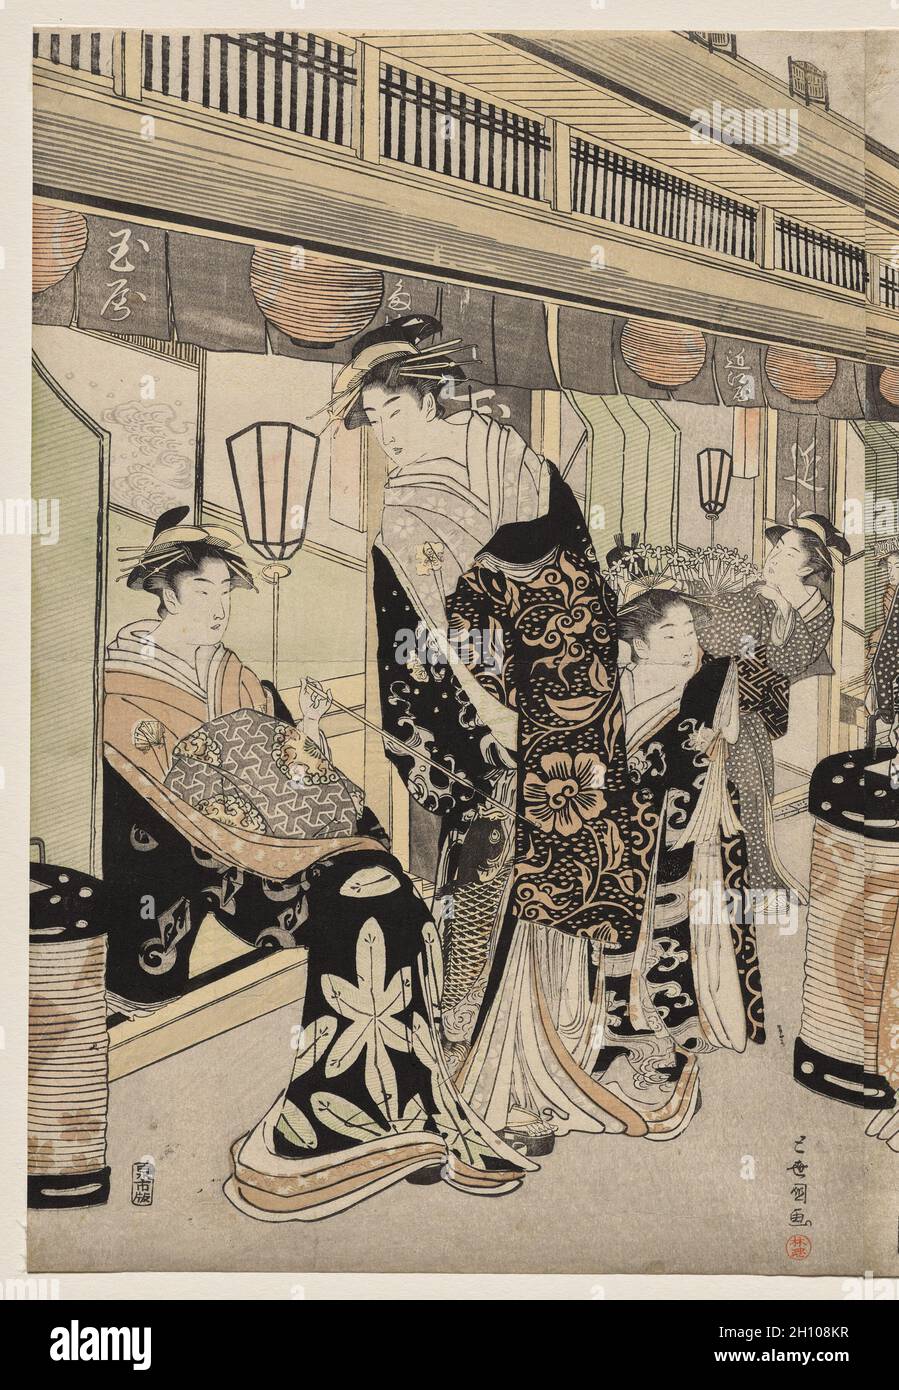 Courtesans Promenading on the Nakanocho, c. 1790. Utagawa Toyokuni (Japanese, 1769-1825). Triptych: color woodblock print; sheet: 37.5 x 25.4 cm (14 3/4 x 10 in.).  The Nakanocho was the main street in the famous Yoshiwara pleasure district, a walled enclosure that housed as many as 4,000 courtesans during its height. In the early evening, elaborately dressed courtesans, accompanied by attendants, promenaded on the main thoroughfare, as in this scene. On the left side of the street, an unaccompanied courtesan holding a long, slender pipe lounges on a porch and converses with another courtesan. Stock Photo